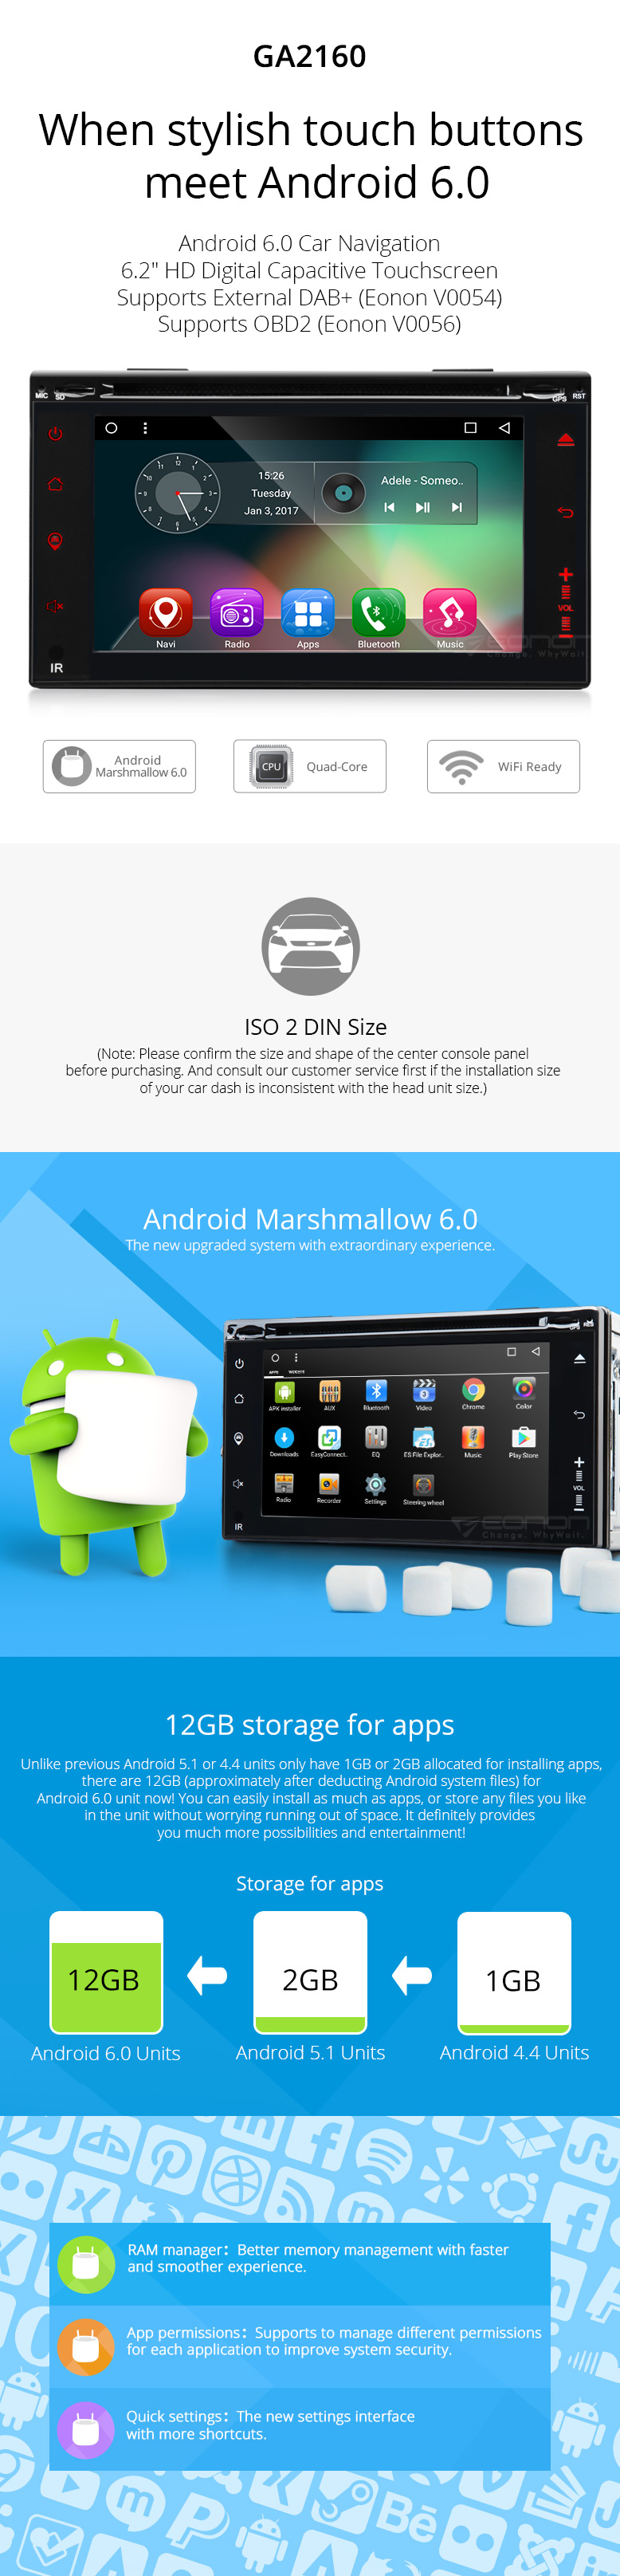 android 2 din car stereo,car dvd gps,android car stereo